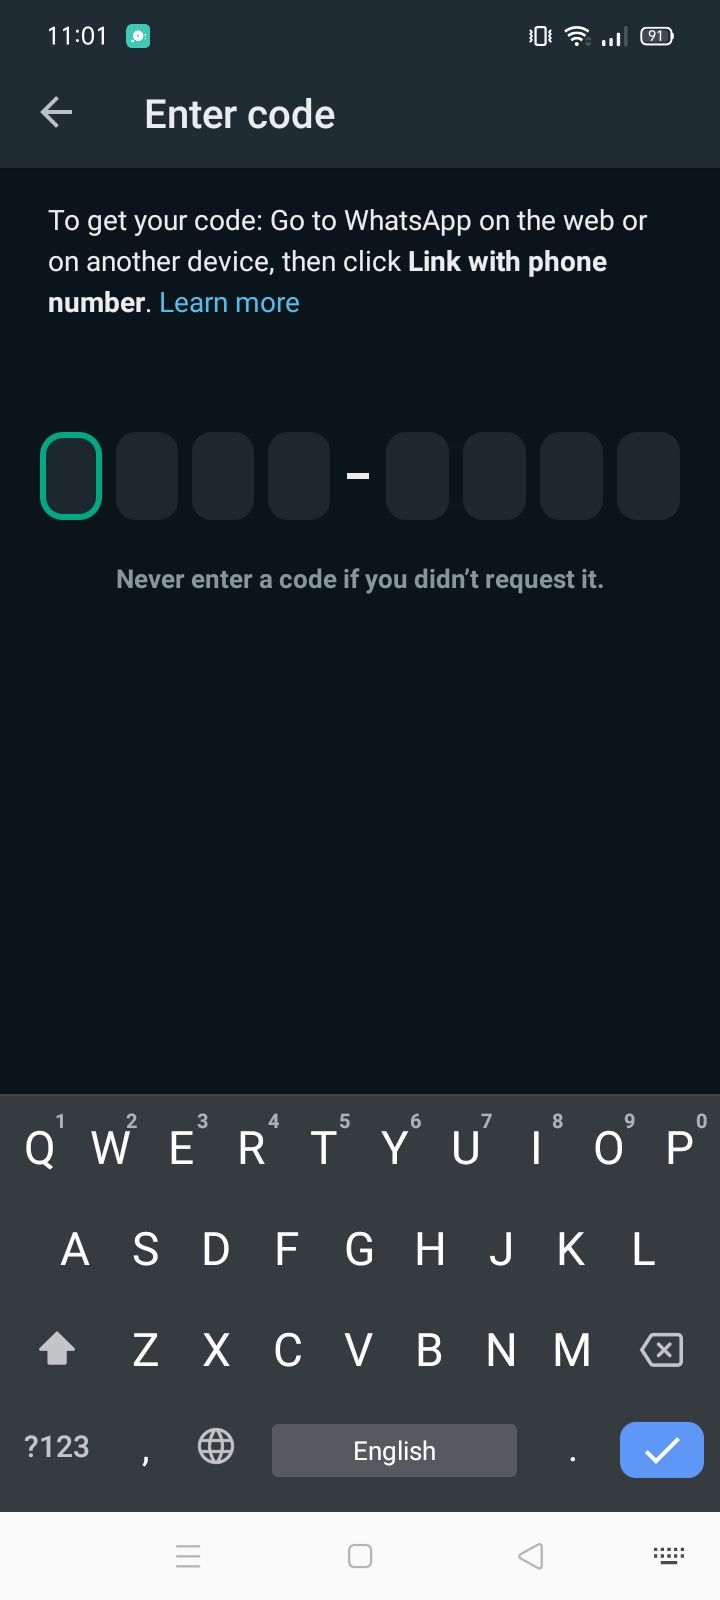 field to enter the code to link device using a phone number